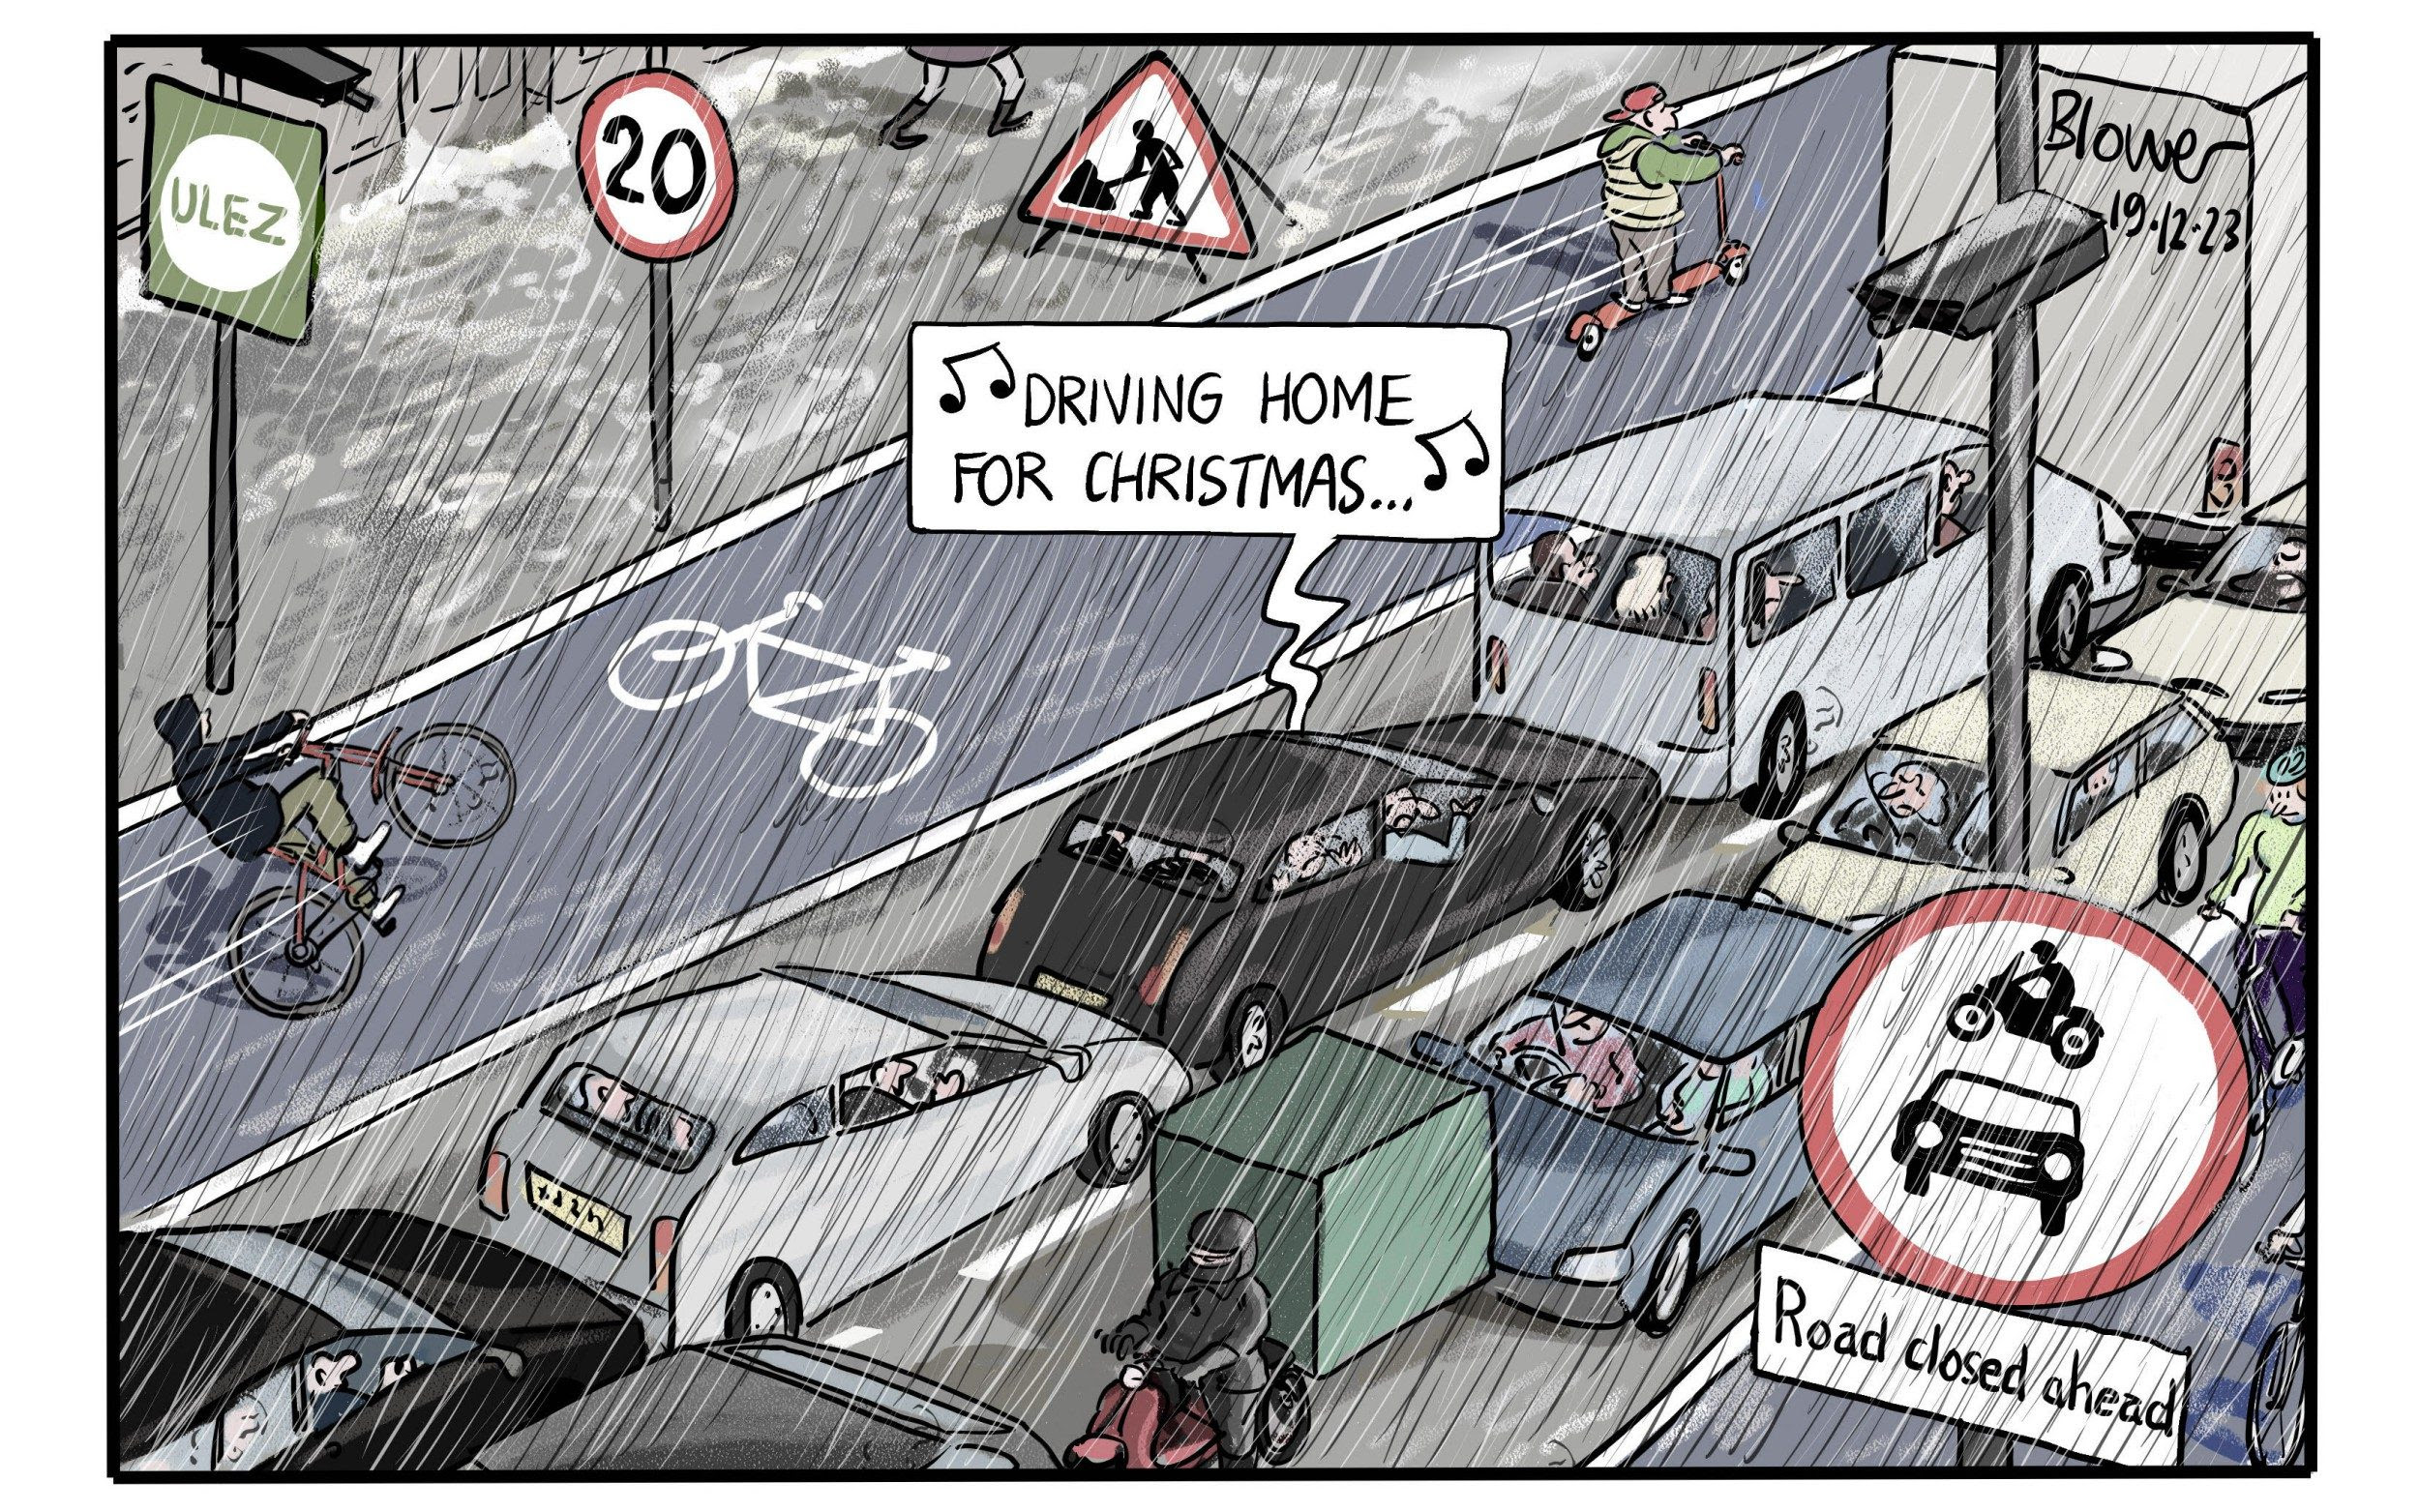 Britons are 'driving home for Christmas', but the roads are jammed.